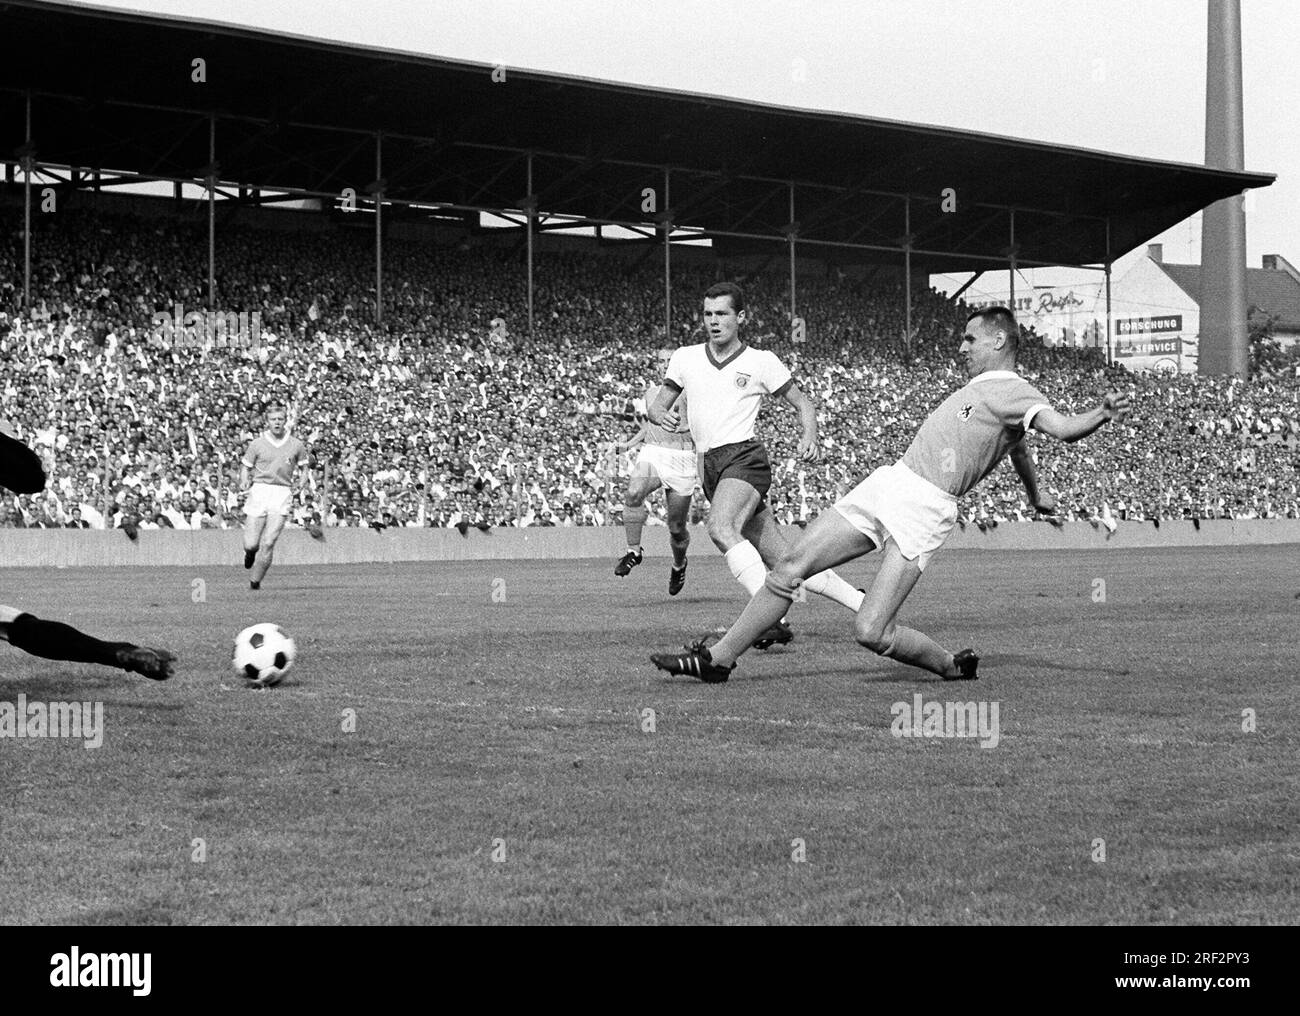 ARCHIVE PHOTO: Friedhelm Timo KONIETZKA would have been 85 on August 2nd, 2023, 01SN 1860 FCB 140865SP.jpg Friedhelm 'Timo' KONIETZKA (D, r.), TSV Munich 1860, scored the goal to 1:0, behind him in the white jersey is Franz BECKENBAUER (D), FC Bayern Munich, who can no longer intervene; first local derby derby of the two teams in the Bundesliga, landscape format; black and white shot; Soccer Bundesliga TSV Munich 1860 - FC Bayern Munich 1:0, on August 14, 1965, first matchday of the 1965/66 season; ?SVEN SIMON, Princess-Luise-Str.41#45479 Muelheim/Ruhr#tel.0208/9413250#fax 0208/9413260#account Stock Photo